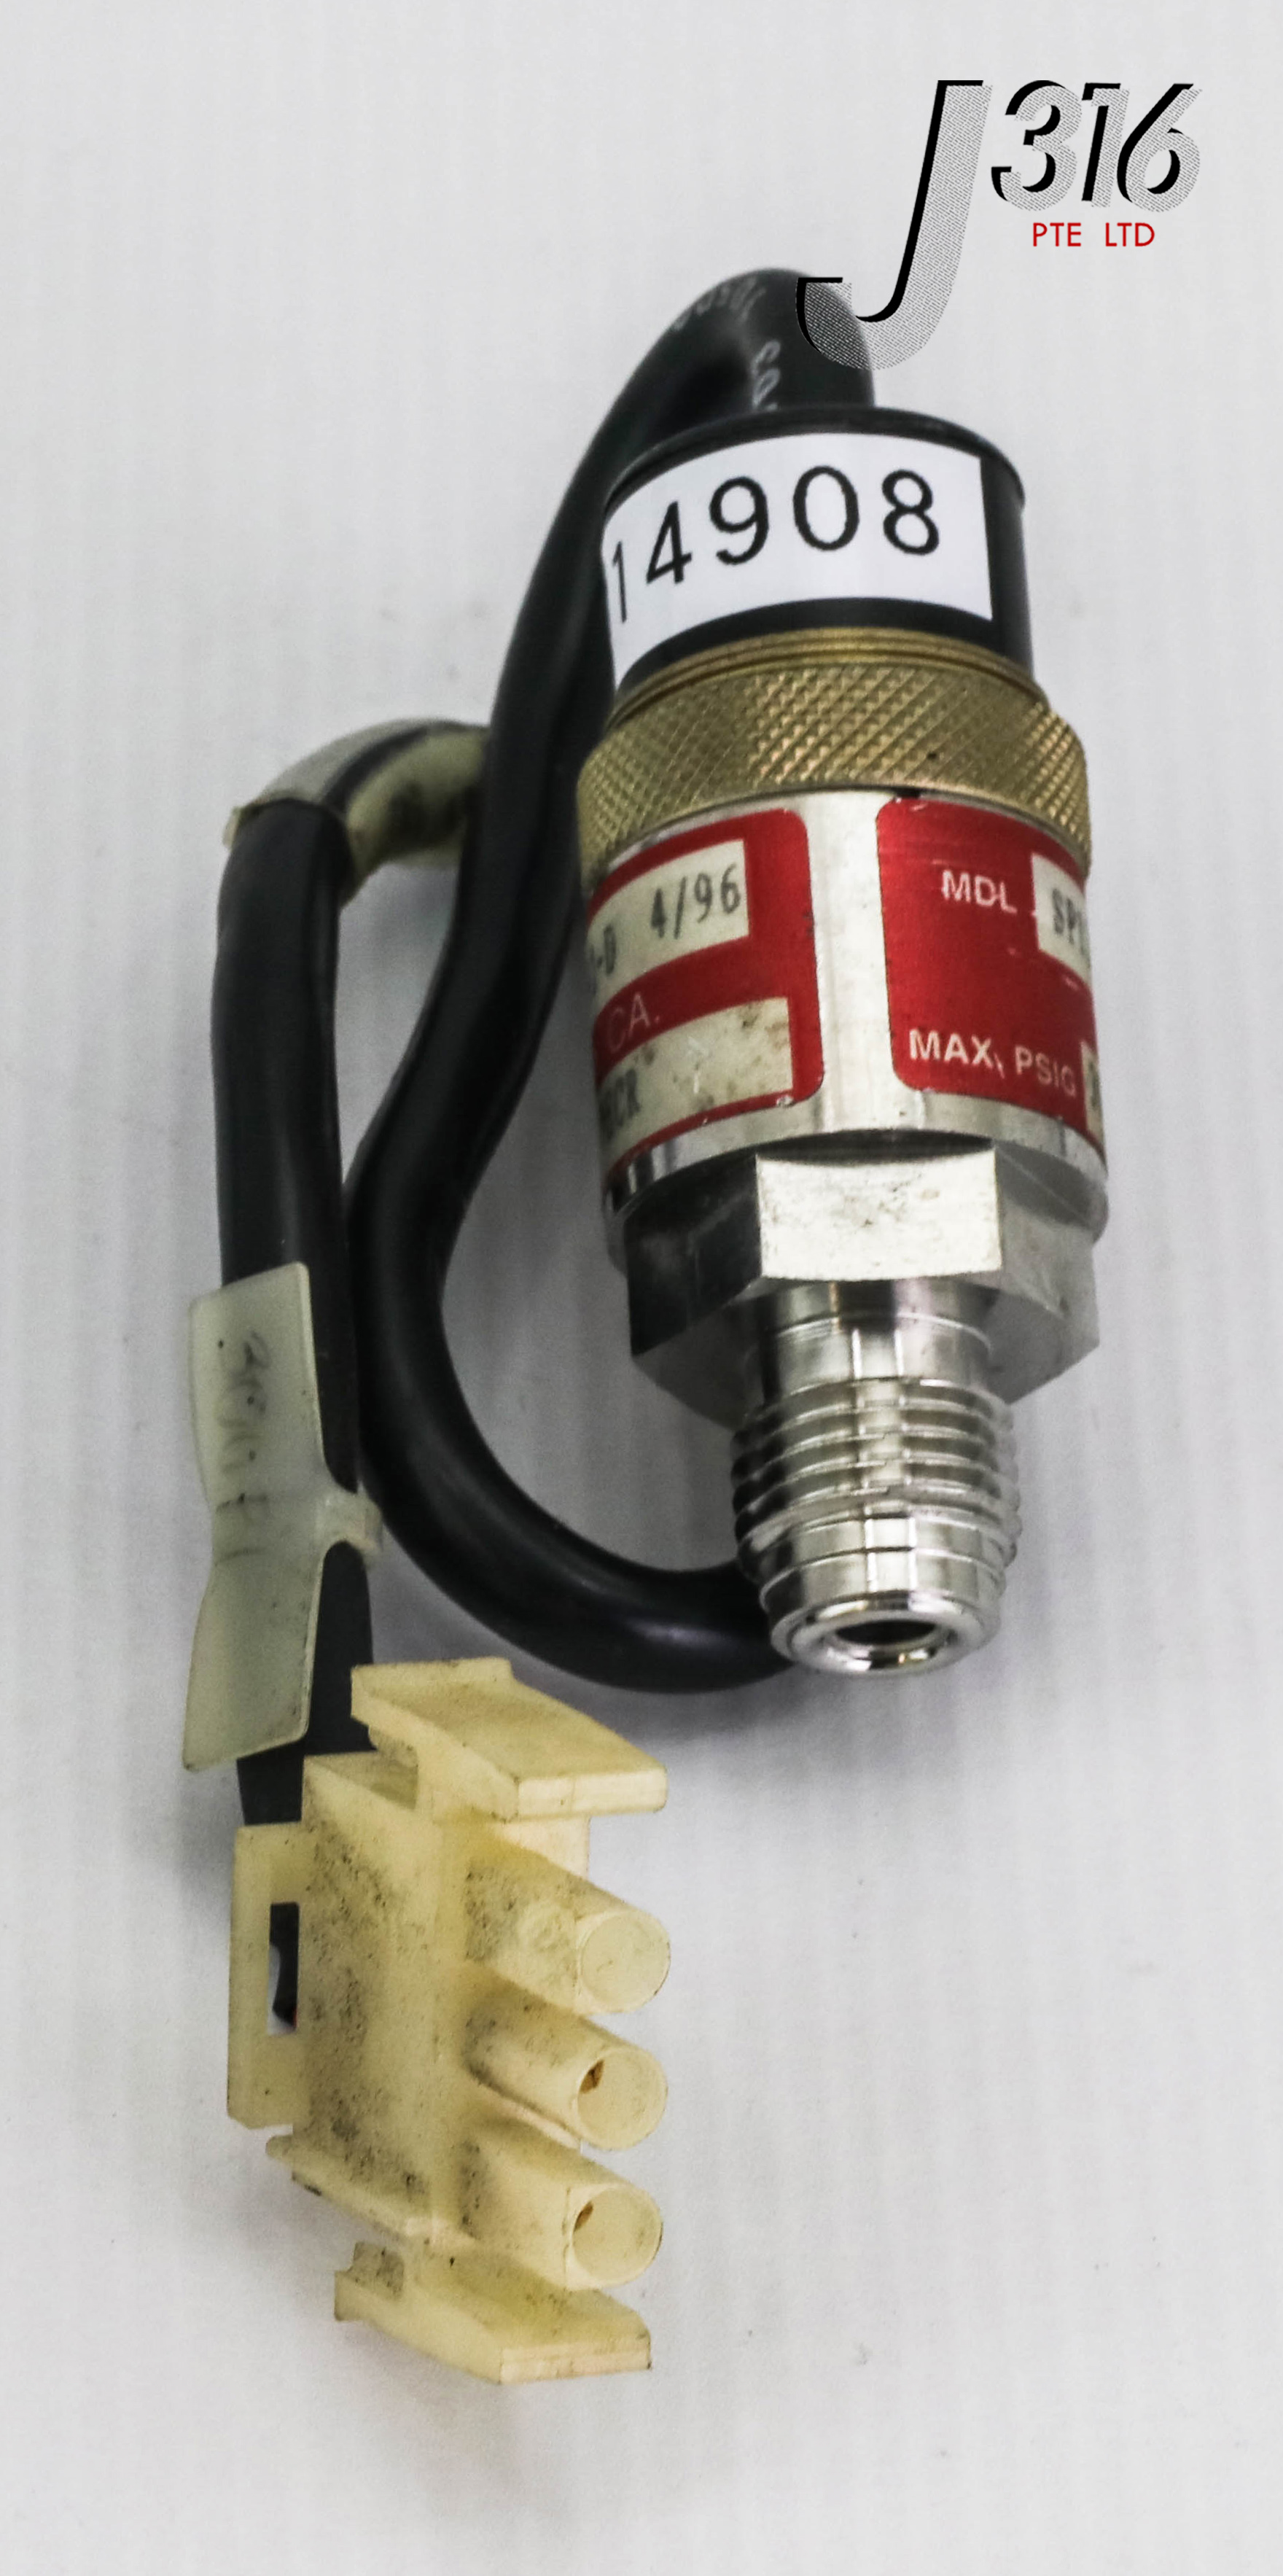 1A Details about   14906 WASCO VACUUM SWITCH 30"HG 115 VAC SV129-31S3C/7774 